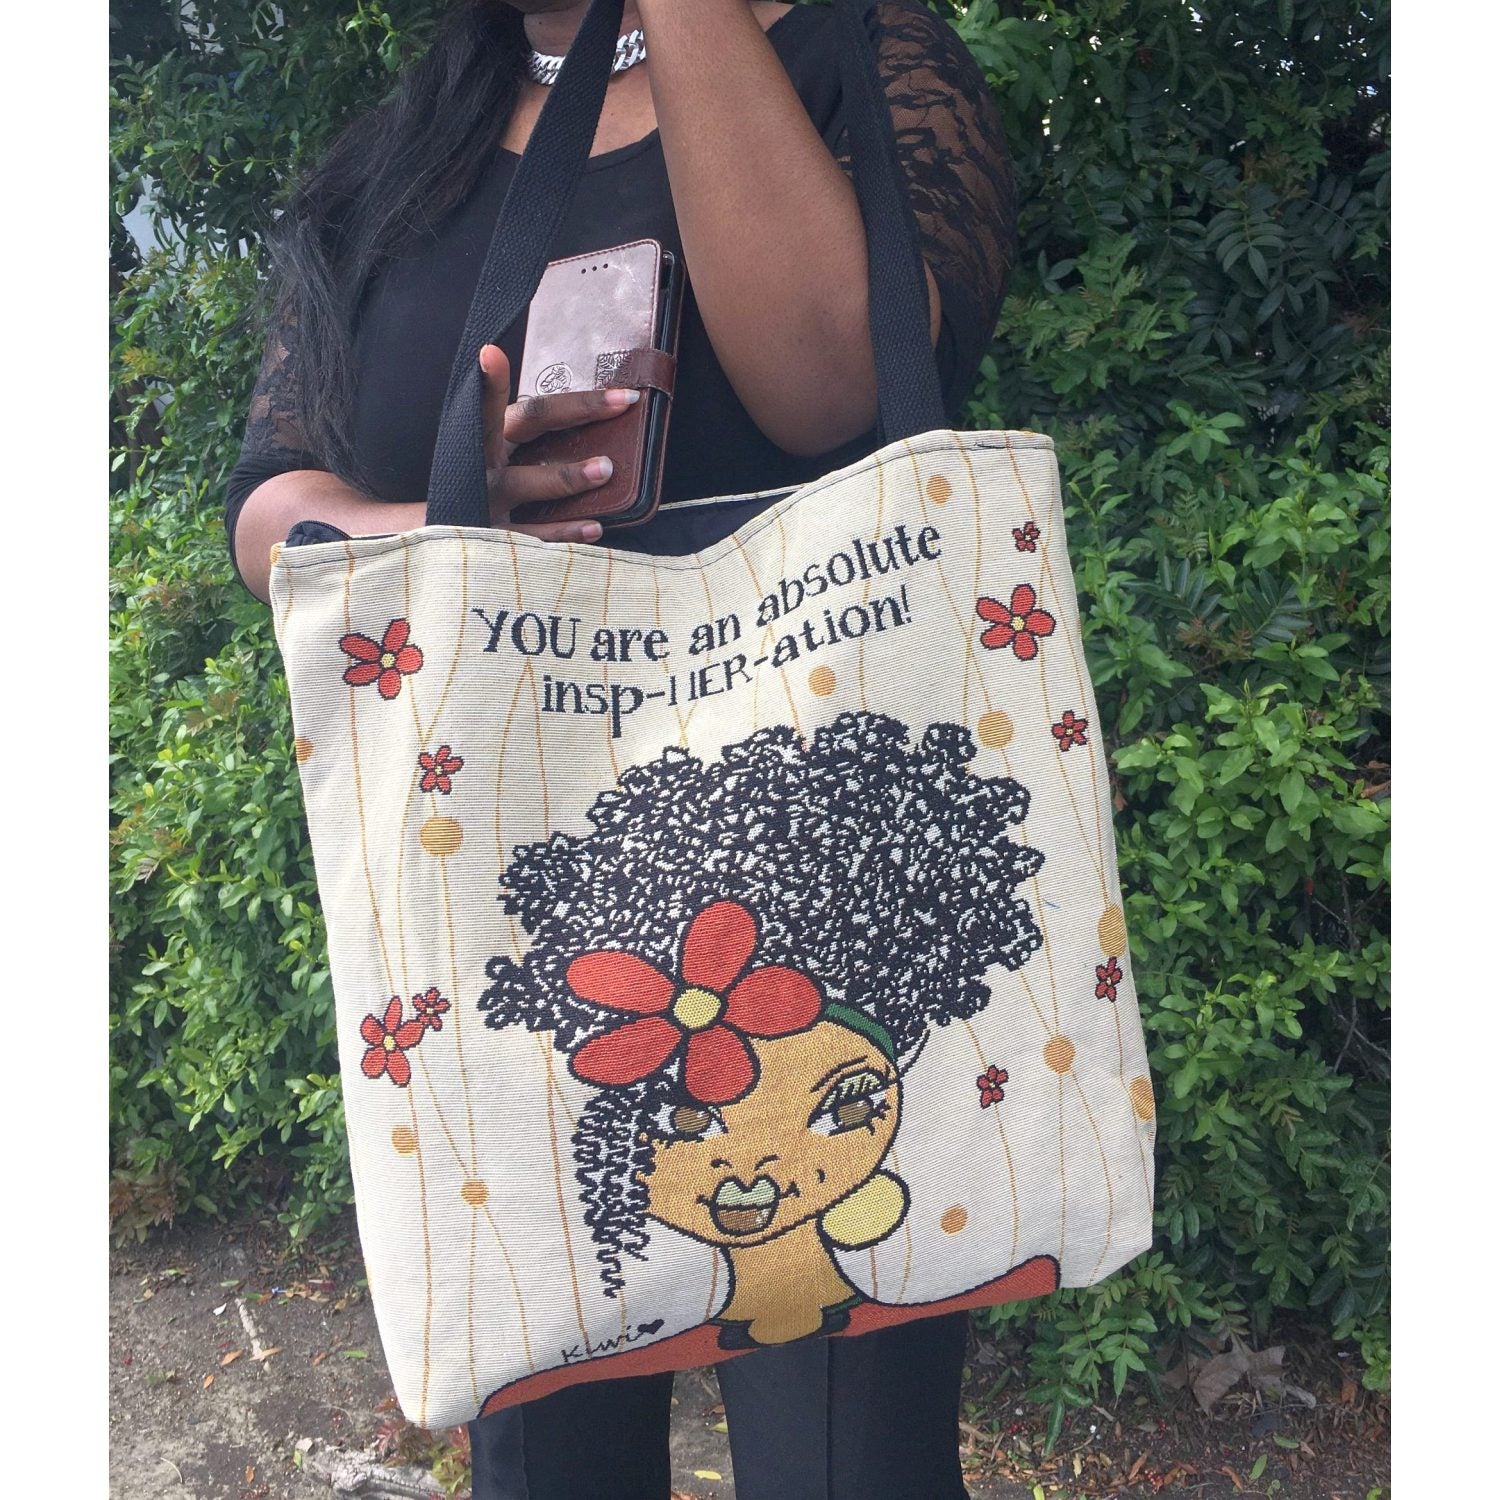 3 of 3: You Are an Insp-HER-ation: African American Woven Tote Bag by Kiwi McDowell